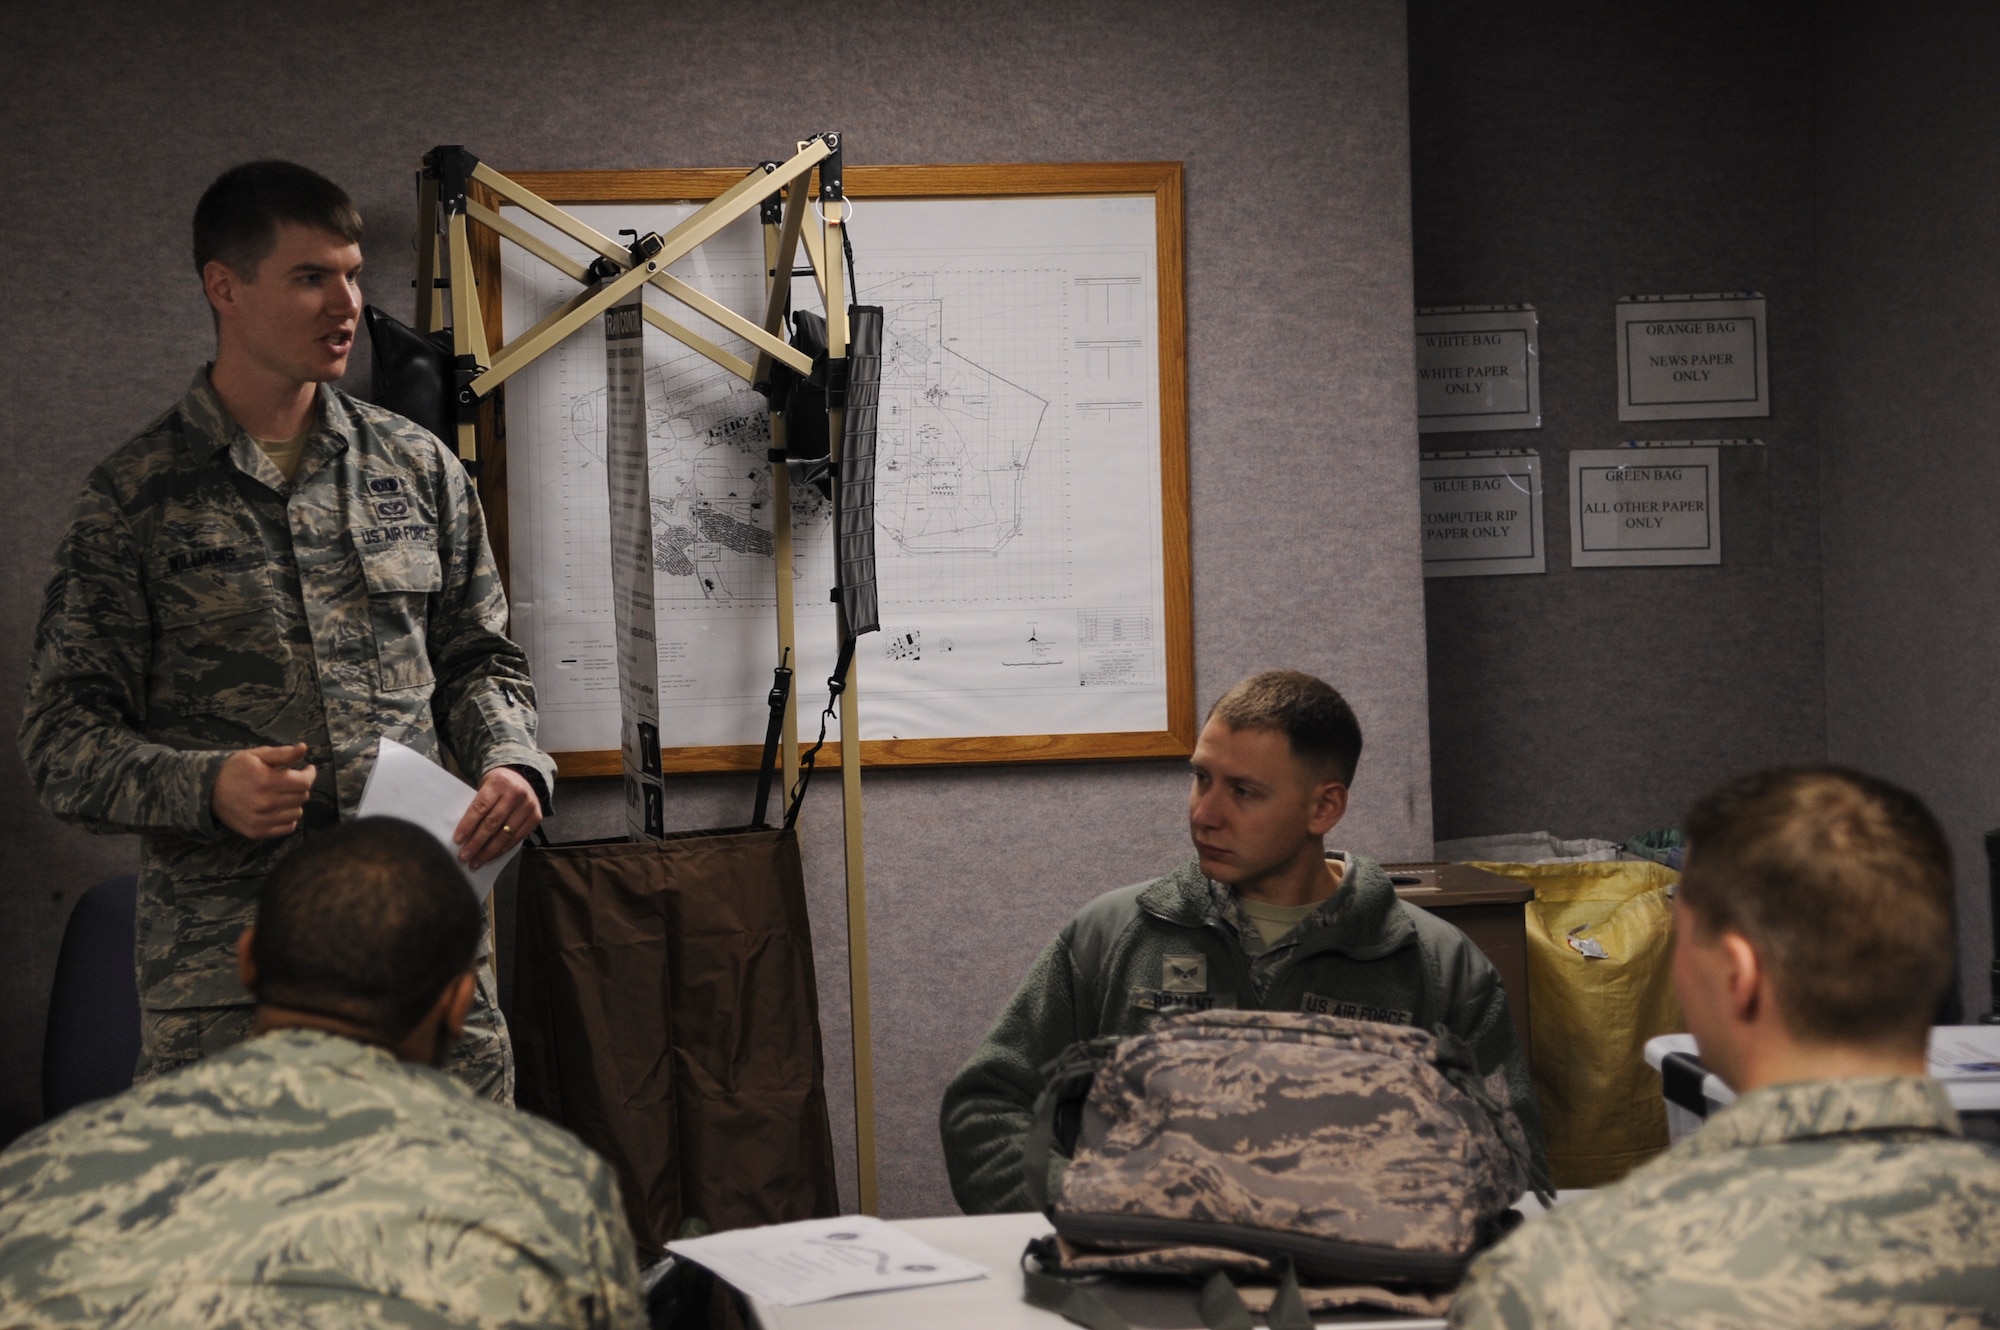 Staff Sgt. Nathan Williams, a 19th Civil Engineer Squadron emergency management journeyman, teaches a chemical, biological, radiological and nuclear defense class Feb. 12, 2014, at Little Rock Air Force Base, Ark. CBRN classes are taught every week at The Rock. (U.S. Air Force photo by Airman 1st Class Harry Brexel)